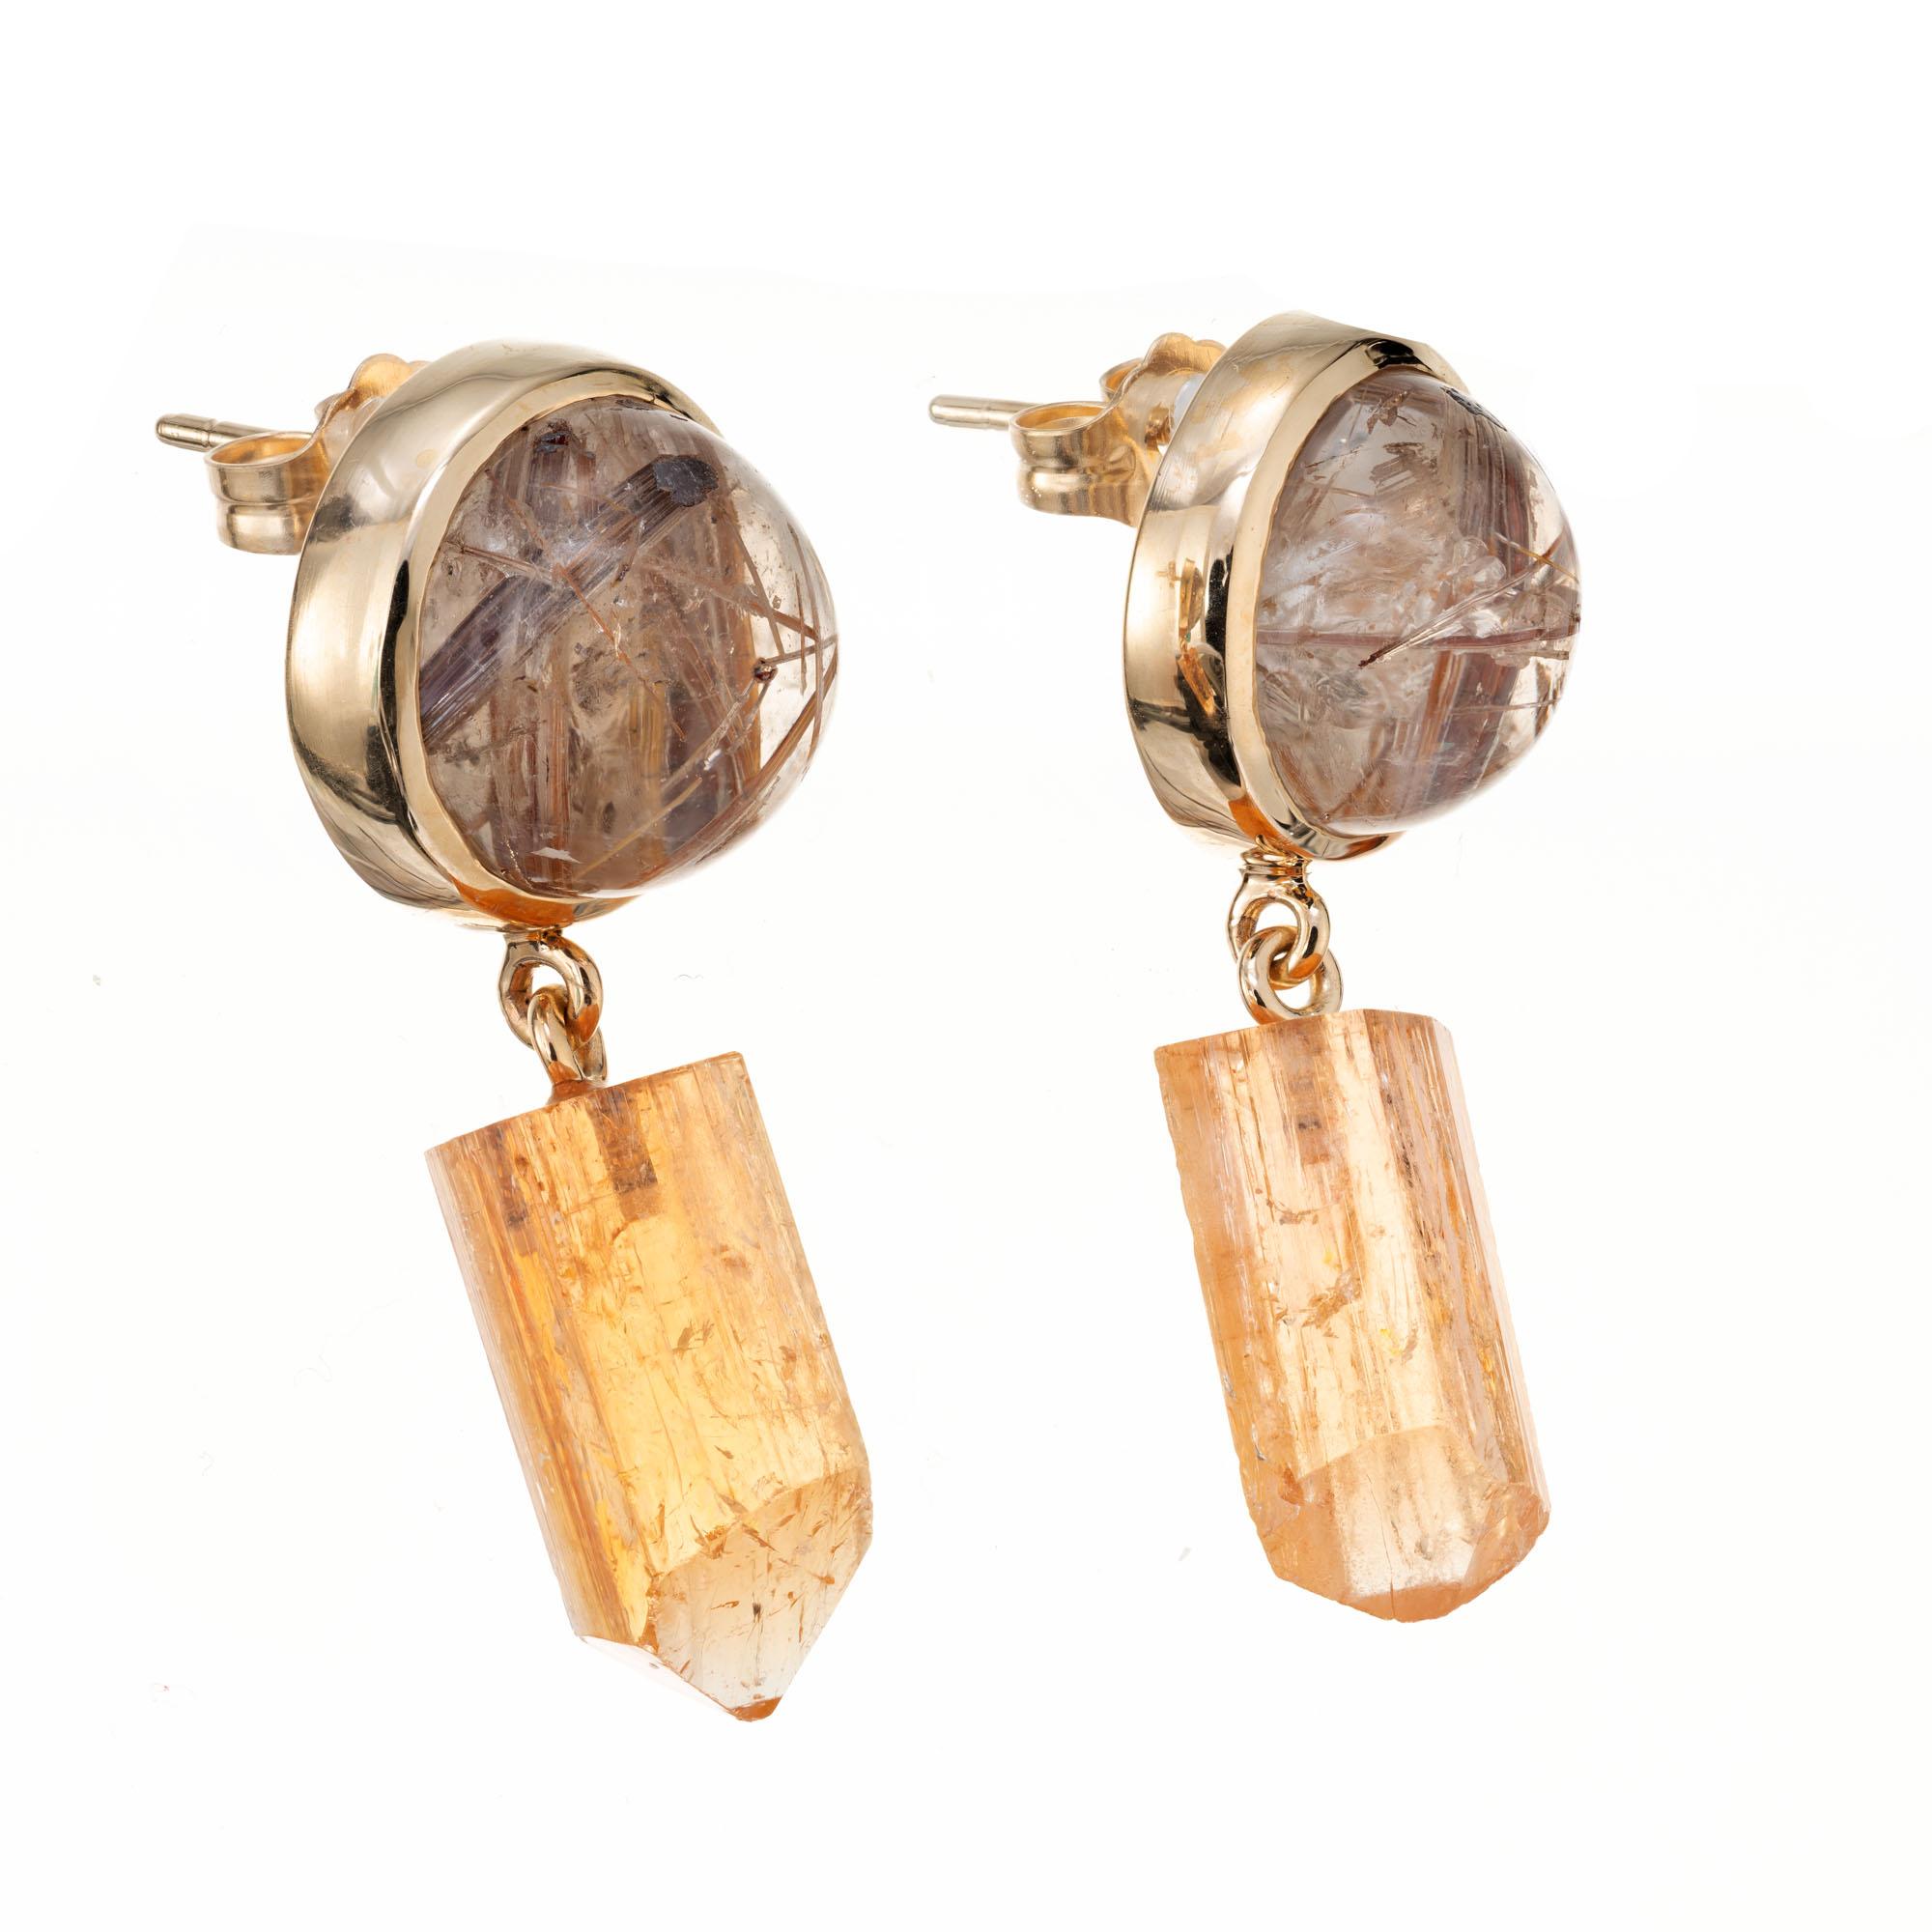 Handmade 14k yellow gold dangle earrings with cabochon rutilated quartz tops and natural precious orange topaz crystal dangles. Designed and crafted in the Peter Suchy workshop

2 rutilated clear golden cabochon quartz, IMP approx. 10.21cts
2 orange